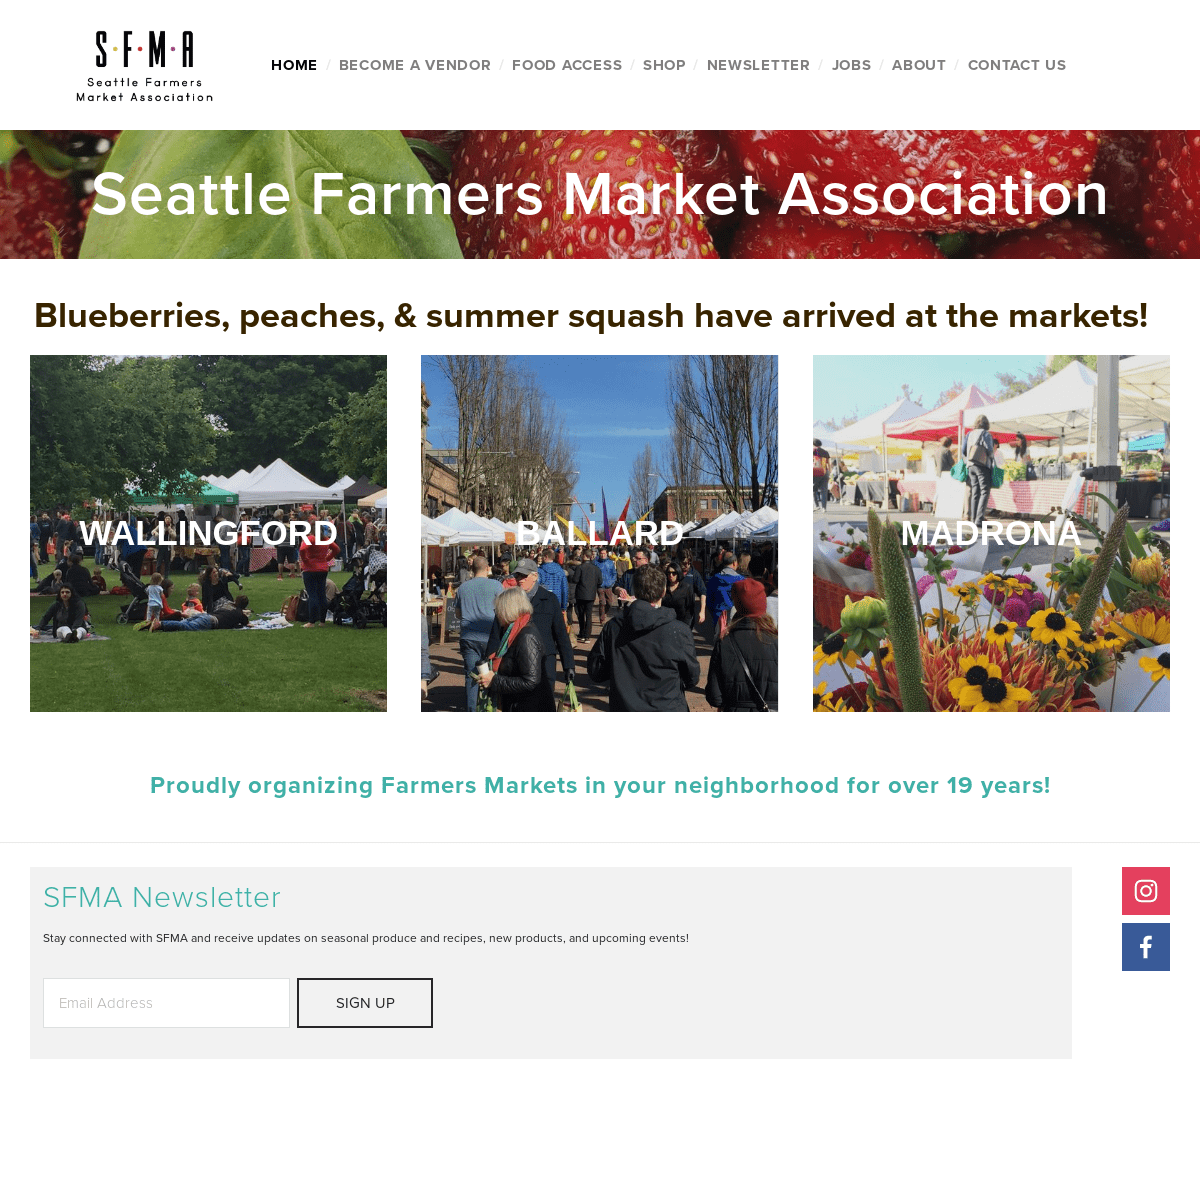 A complete backup of sfmamarkets.com